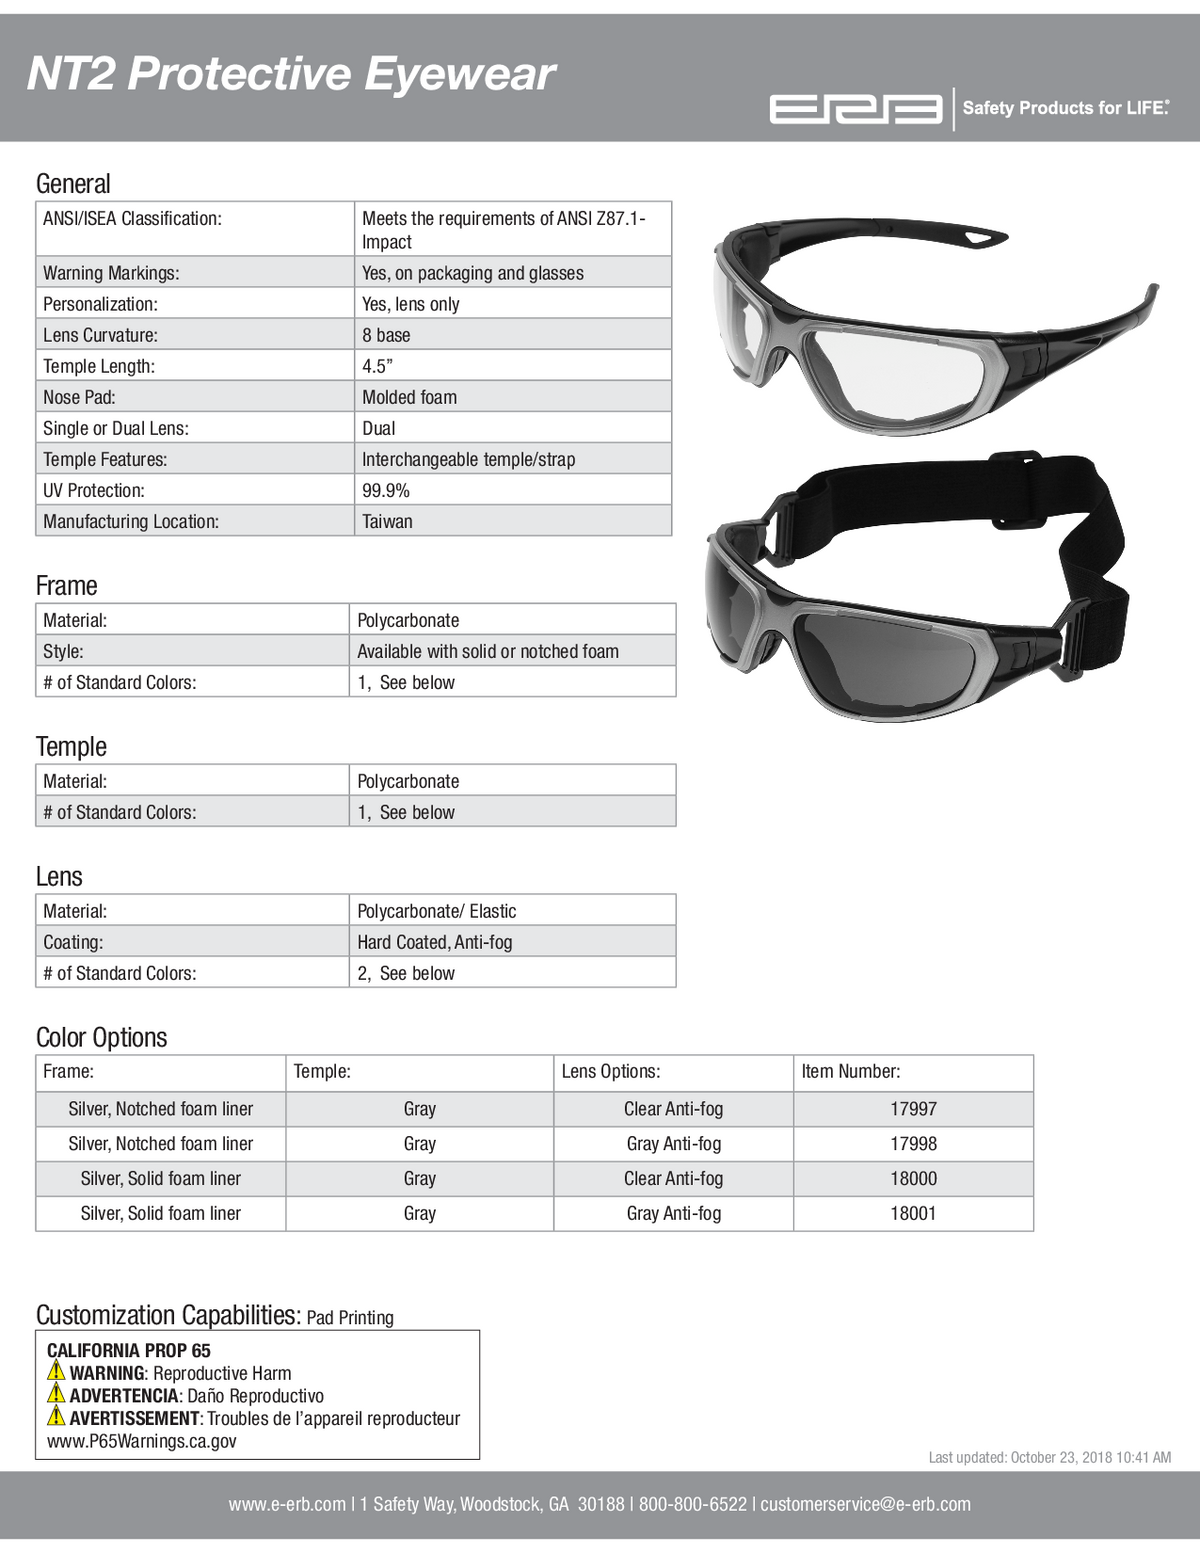 NT2 Safety Glasses with Anti-Fog Lens 1PC